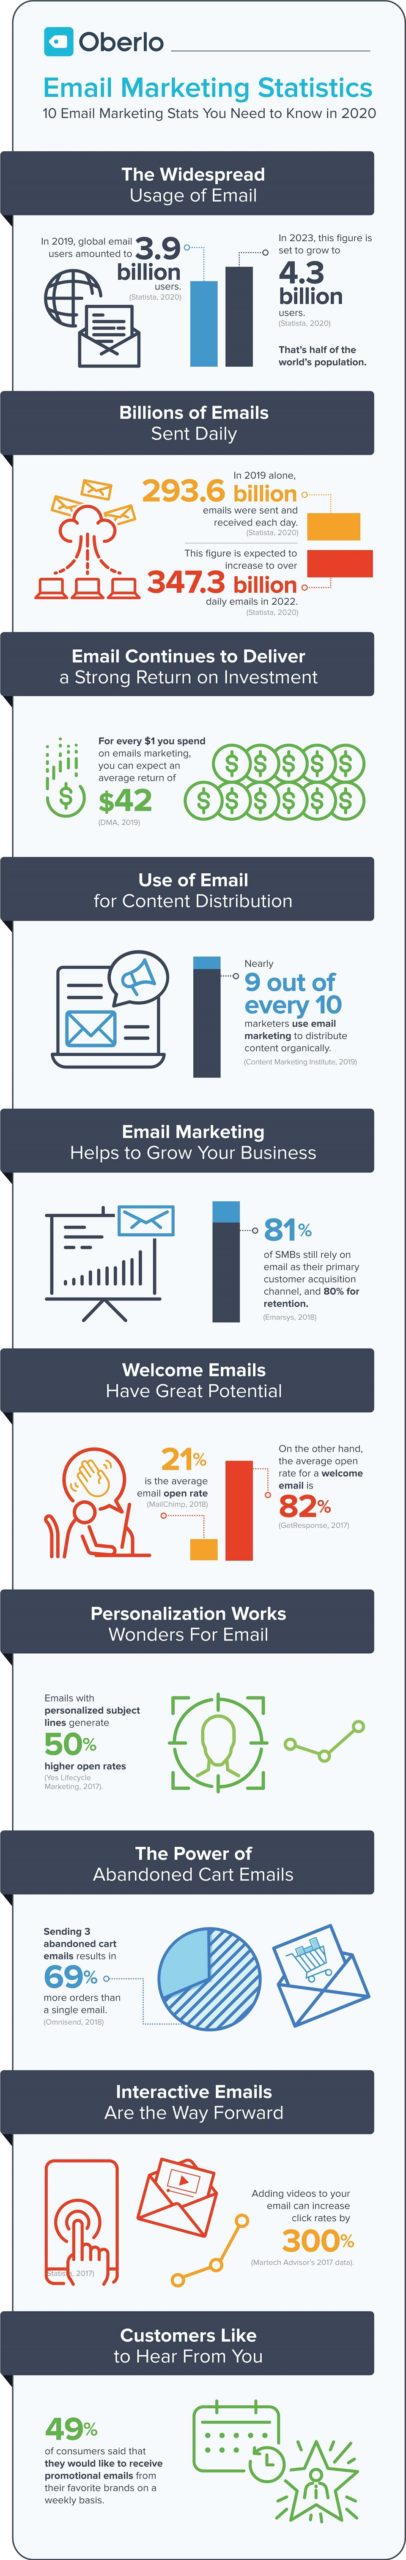 Do not forget email marketing - INFOGRAPHIC